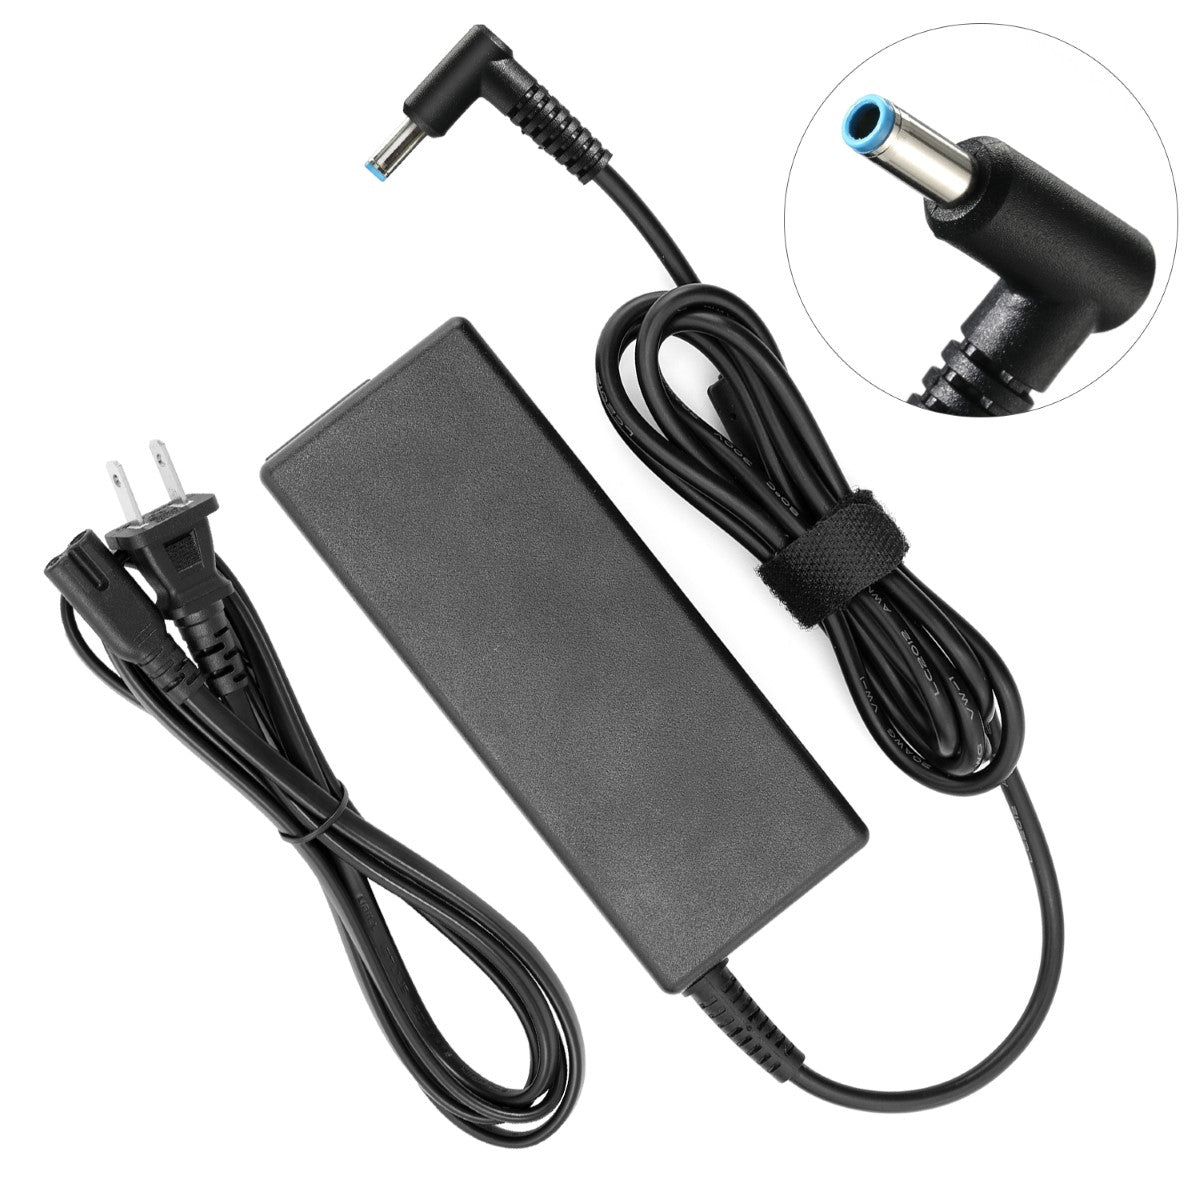 Charger for HP Envy 14t-j100 CTO Notebook.